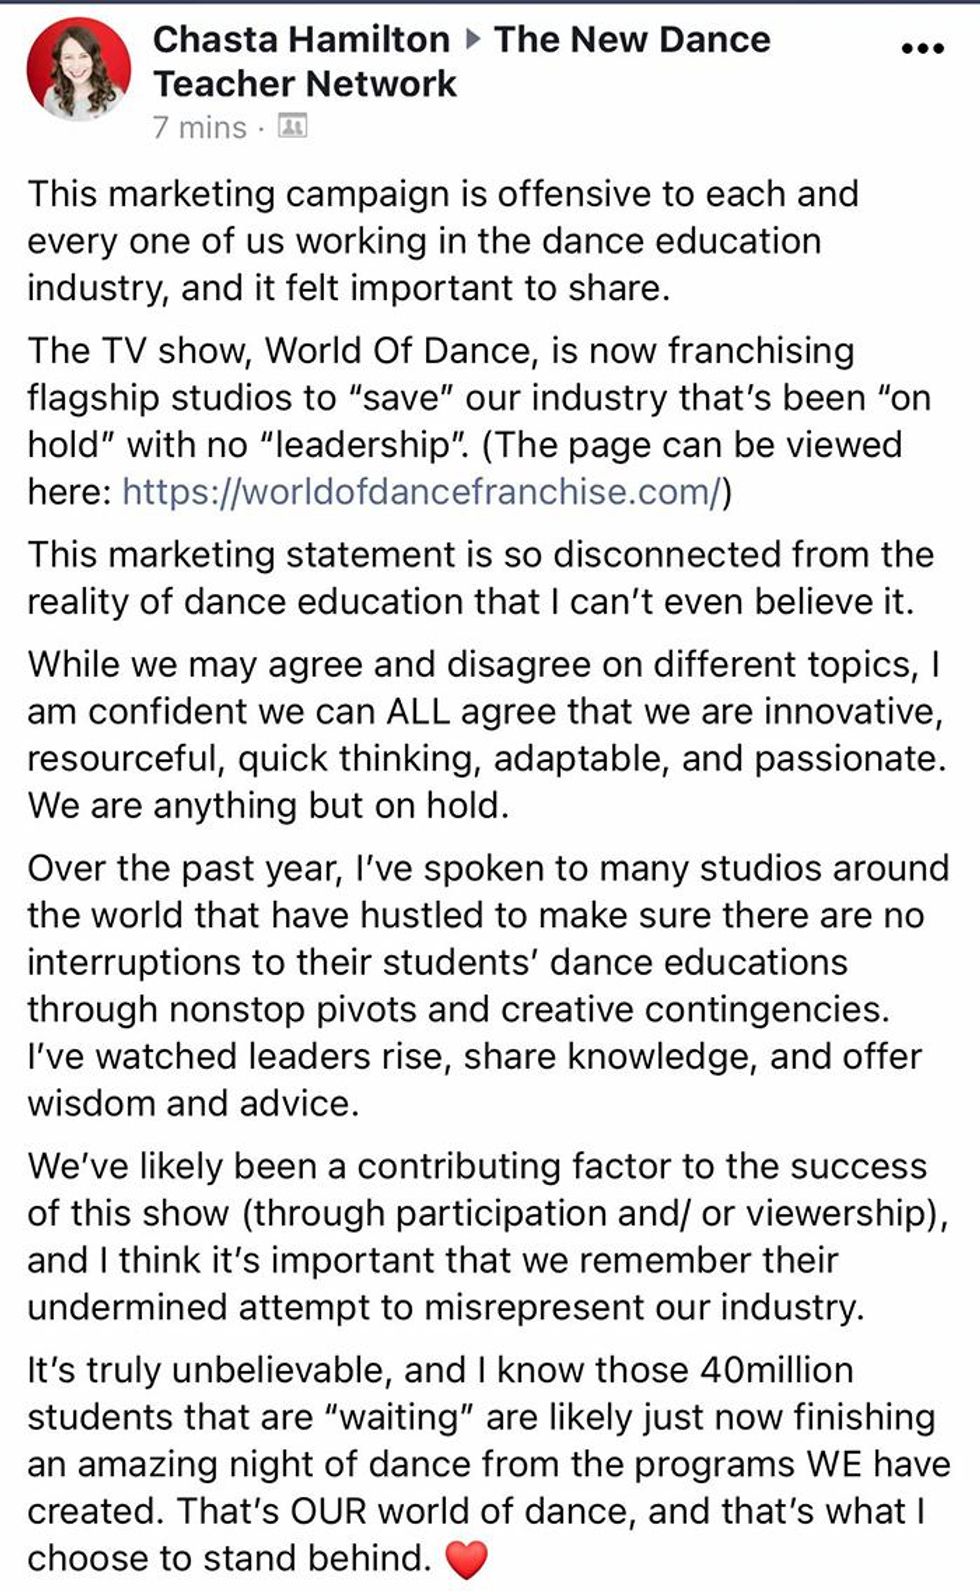 u200bChasta Hamilton's post in the New Dance Teacher Network Facebook group, explaining why she found the marketing campaign offensive